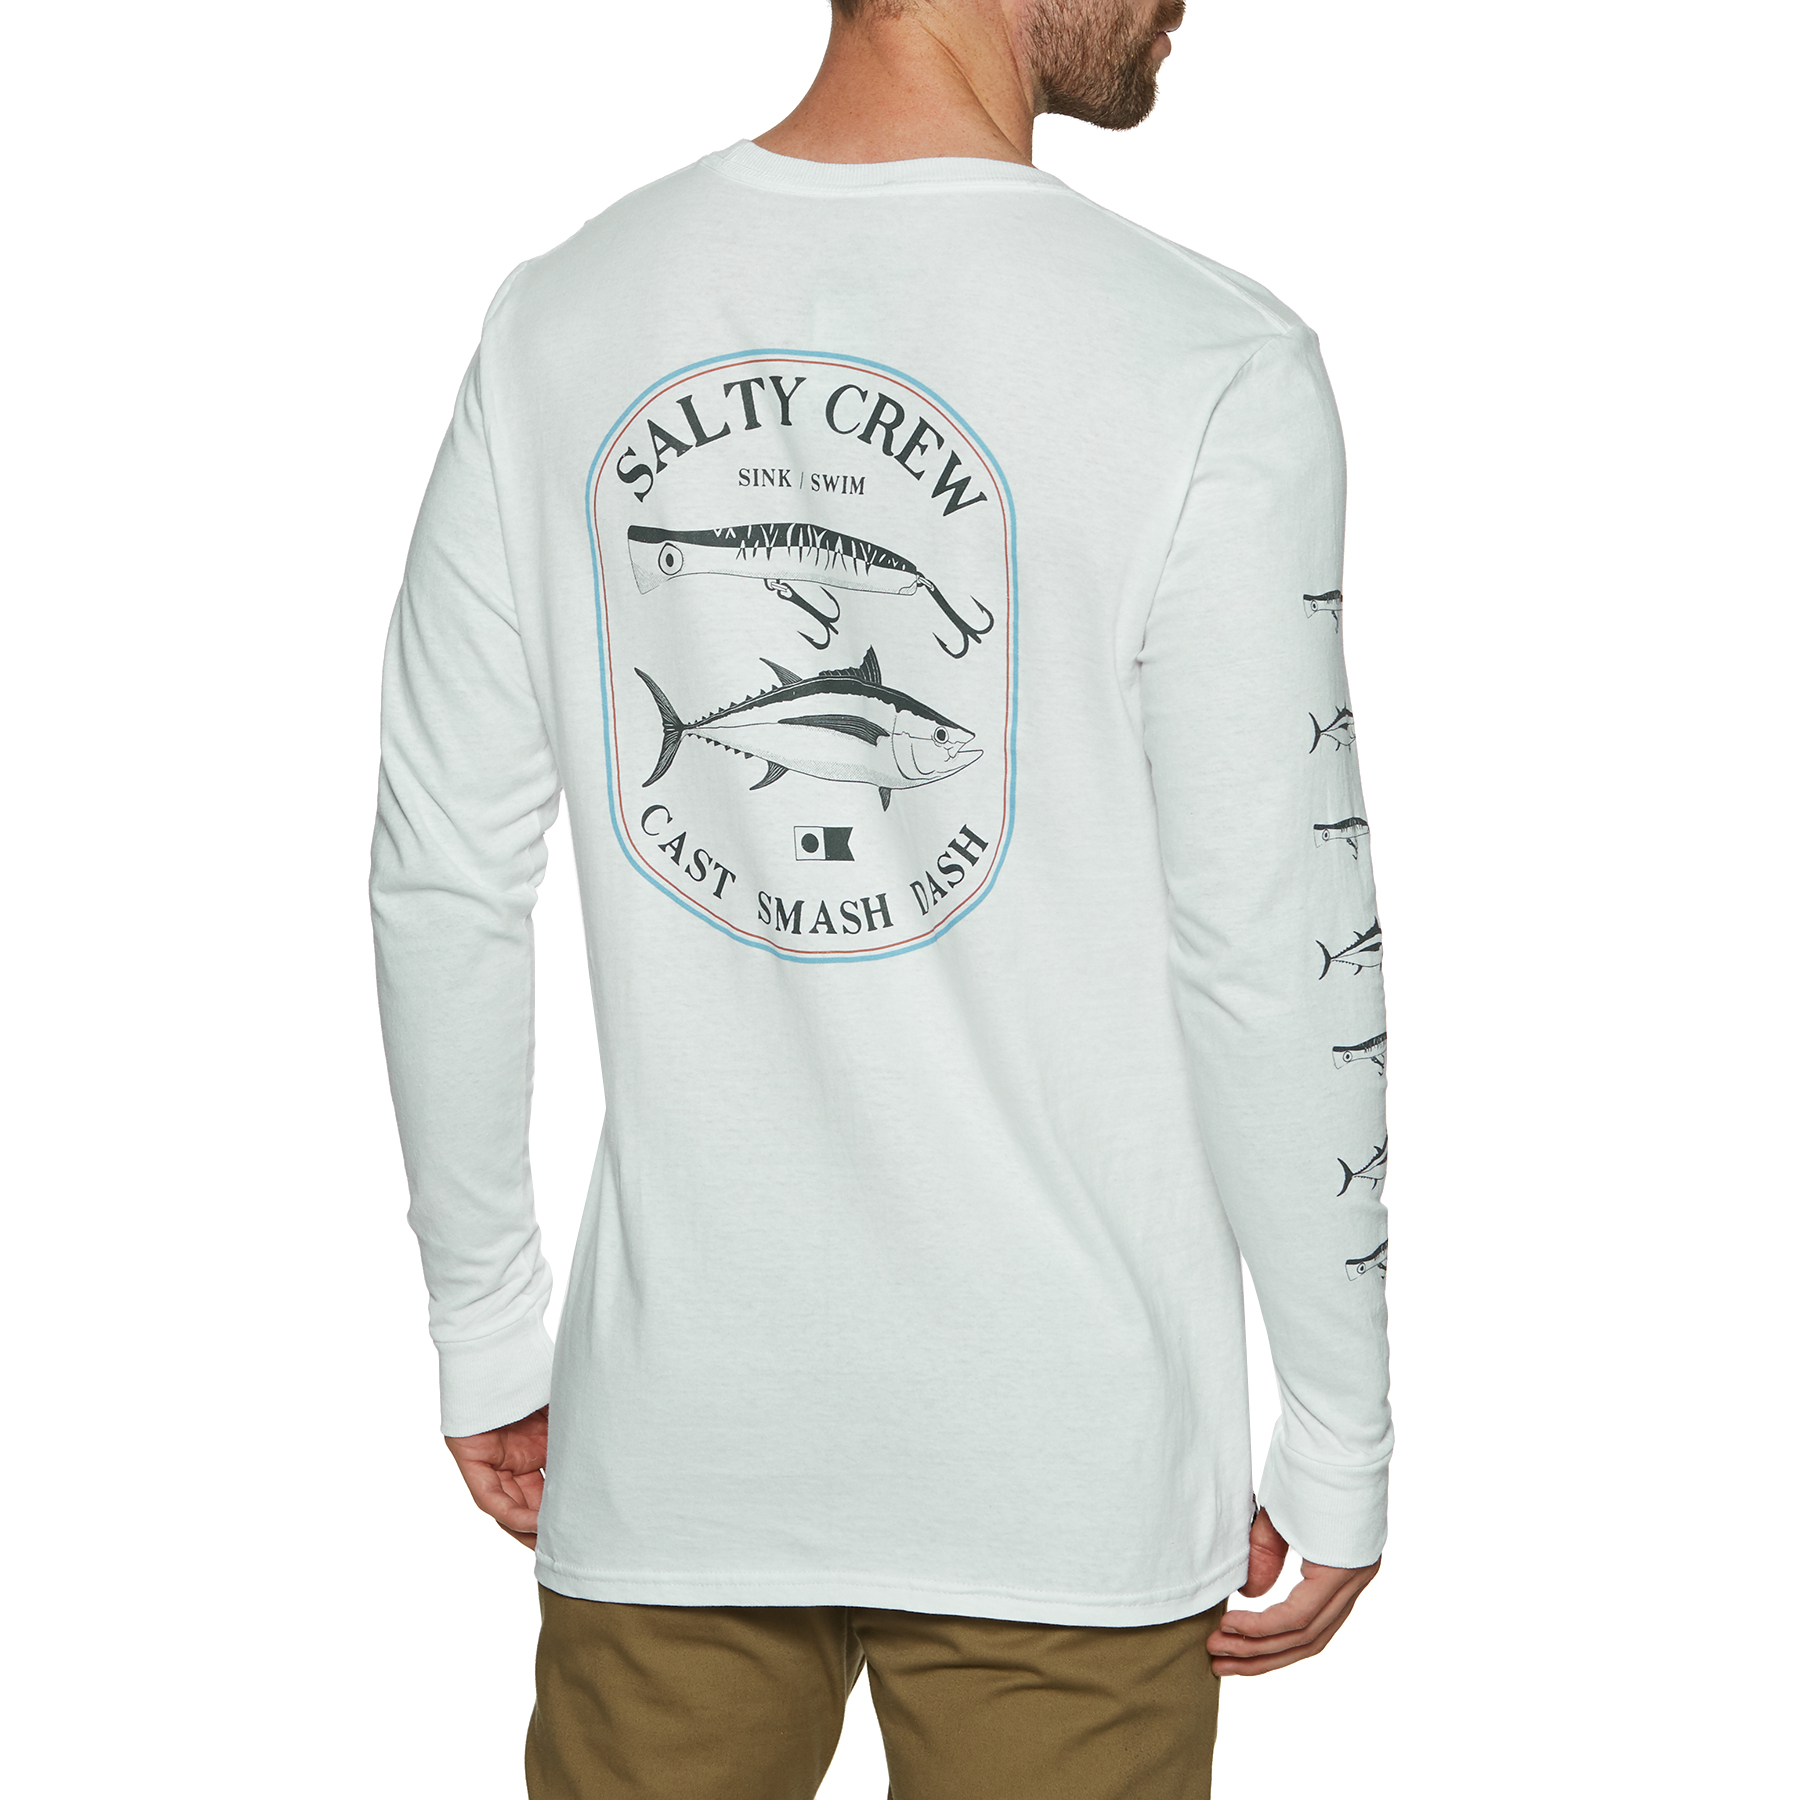 SALTY CREW SURFACE STANDARD LONG SLEEVE WHITE SIZE L - Fish City